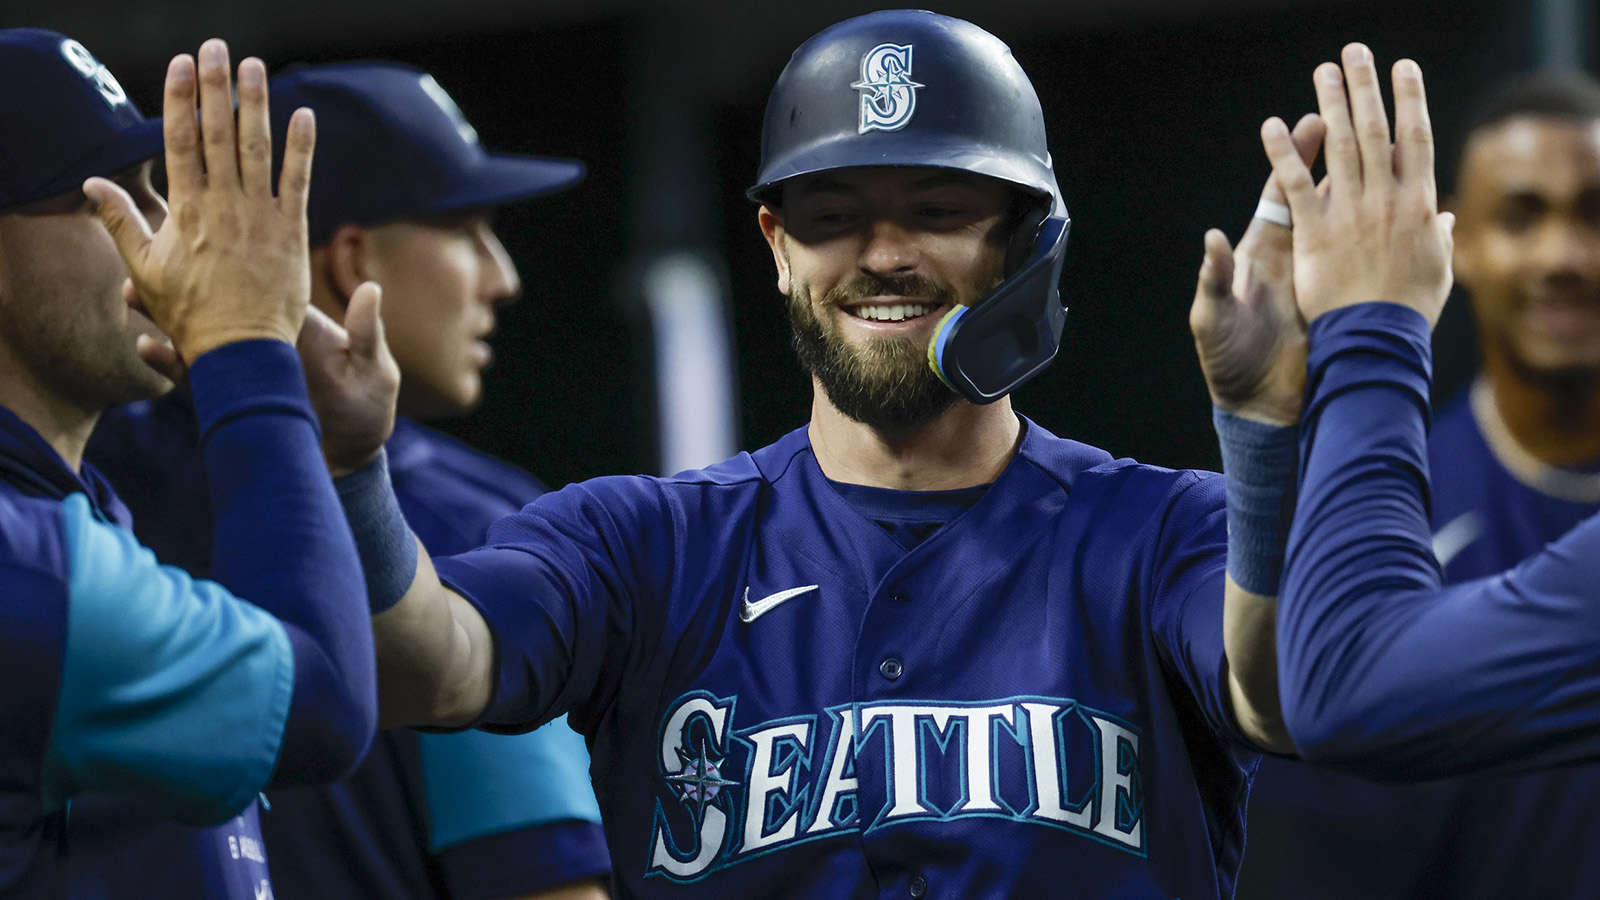 Mitch Haniger, Bay Area native, realizes lifelong dream by playing